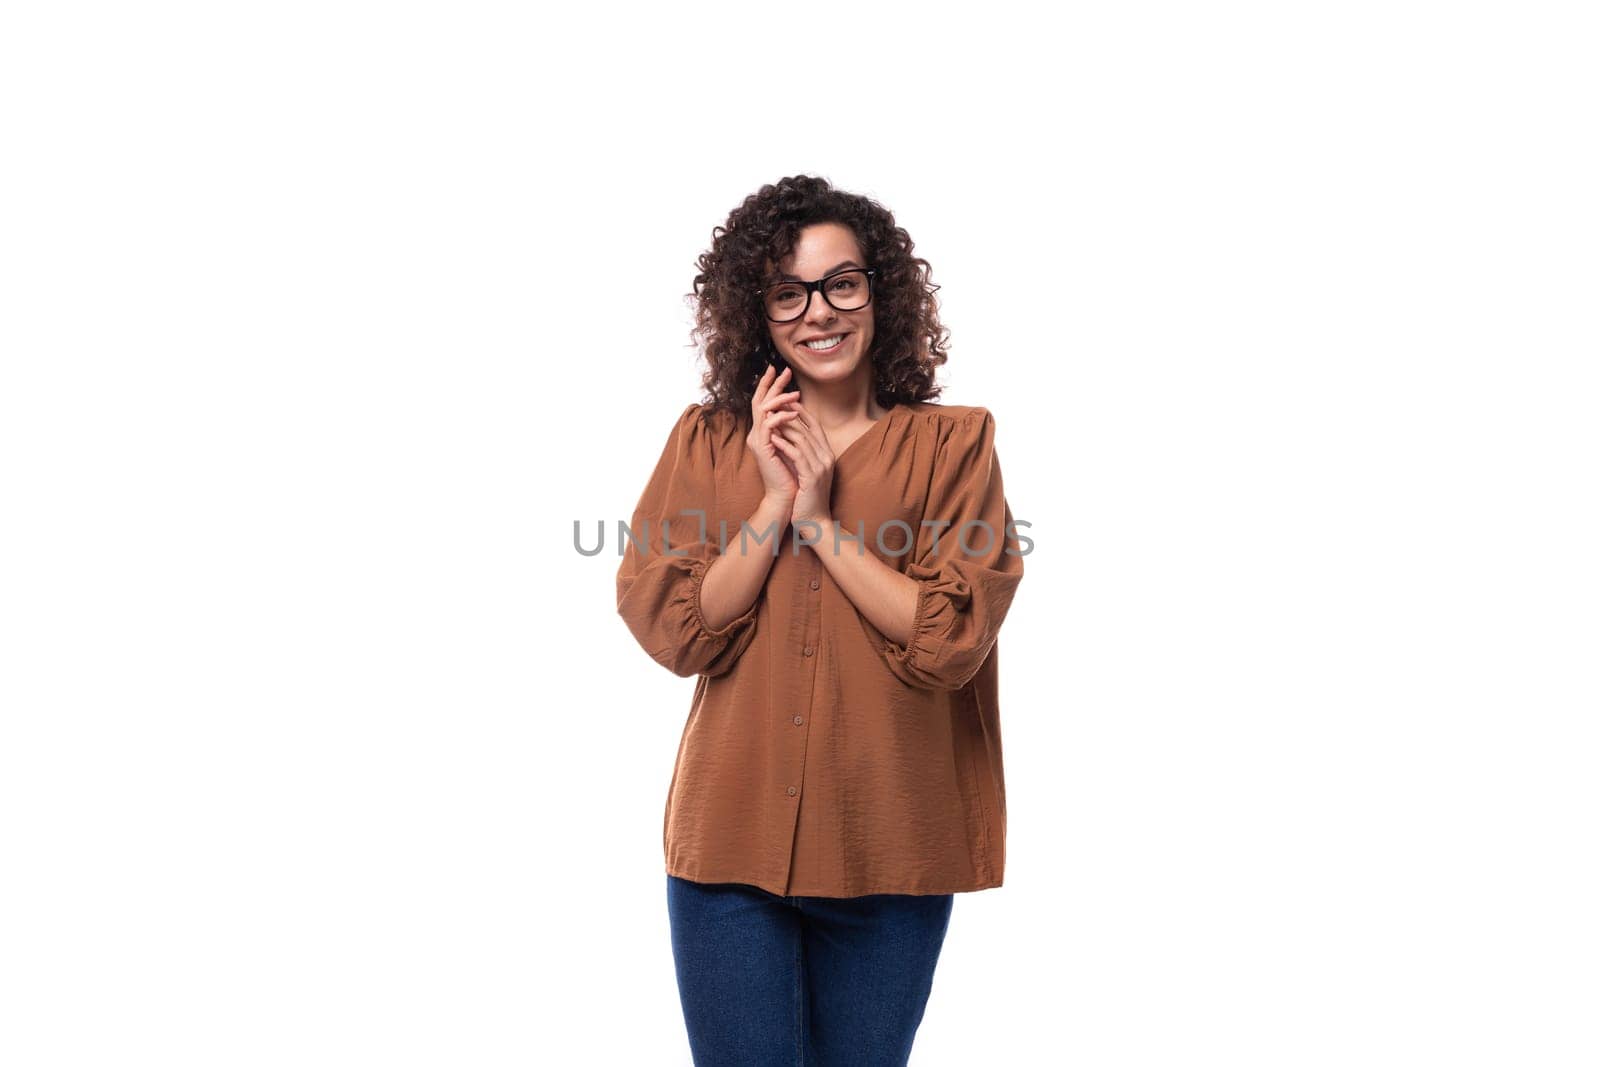 young positive cheerful slender woman with curls dressed in a brown blouse by TRMK